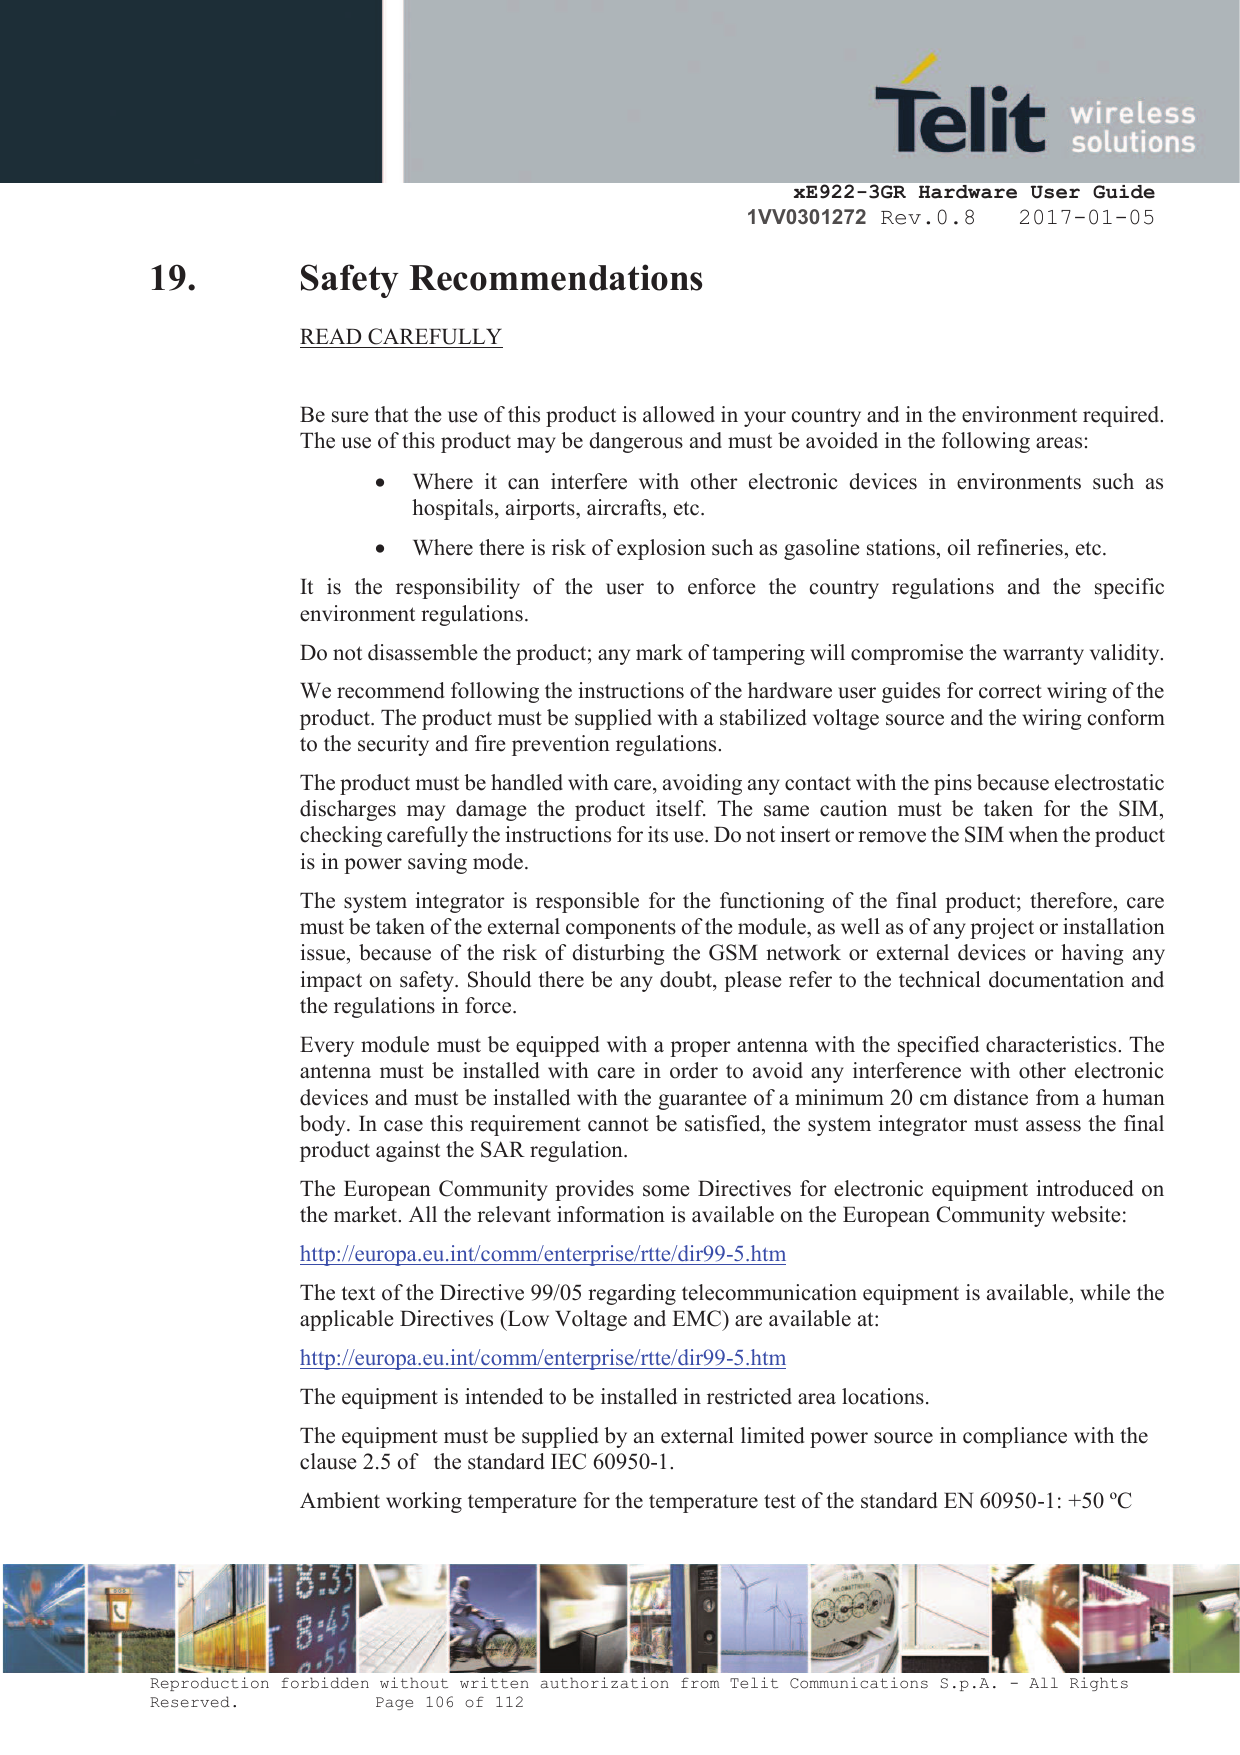     xE922-3GR Hardware User Guide 1VV0301272 Rev.0.8   2017-01-05 Reproduction forbidden without written authorization from Telit Communications S.p.A. - All Rights Reserved.    Page 106 of 112  19. Safety Recommendations READ CAREFULLY  Be sure that the use of this product is allowed in your country and in the environment required. The use of this product may be dangerous and must be avoided in the following areas: · Where  it  can  interfere  with  other  electronic  devices  in  environments  such  as hospitals, airports, aircrafts, etc. · Where there is risk of explosion such as gasoline stations, oil refineries, etc.  It  is  the  responsibility  of  the  user  to  enforce  the  country  regulations  and  the  specific environment regulations. Do not disassemble the product; any mark of tampering will compromise the warranty validity. We recommend following the instructions of the hardware user guides for correct wiring of the product. The product must be supplied with a stabilized voltage source and the wiring conform to the security and fire prevention regulations. The product must be handled with care, avoiding any contact with the pins because electrostatic discharges  may  damage  the  product  itself.  The  same  caution  must  be  taken  for  the  SIM, checking carefully the instructions for its use. Do not insert or remove the SIM when the product is in power saving mode. The system integrator is responsible for the functioning of the final product; therefore, care must be taken of the external components of the module, as well as of any project or installation issue, because of the risk of disturbing the GSM network or external devices or having any impact on safety. Should there be any doubt, please refer to the technical documentation and the regulations in force. Every module must be equipped with a proper antenna with the specified characteristics. The antenna must be installed with care in order to avoid any interference with other electronic devices and must be installed with the guarantee of a minimum 20 cm distance from a human body. In case this requirement cannot be satisfied, the system integrator must assess the final product against the SAR regulation. The European Community provides some Directives for electronic equipment introduced on the market. All the relevant information is available on the European Community website: http://europa.eu.int/comm/enterprise/rtte/dir99-5.htm The text of the Directive 99/05 regarding telecommunication equipment is available, while the applicable Directives (Low Voltage and EMC) are available at: http://europa.eu.int/comm/enterprise/rtte/dir99-5.htm The equipment is intended to be installed in restricted area locations. The equipment must be supplied by an external limited power source in compliance with the clause 2.5 of   the standard IEC 60950-1. Ambient working temperature for the temperature test of the standard EN 60950-1: +50 ºC 